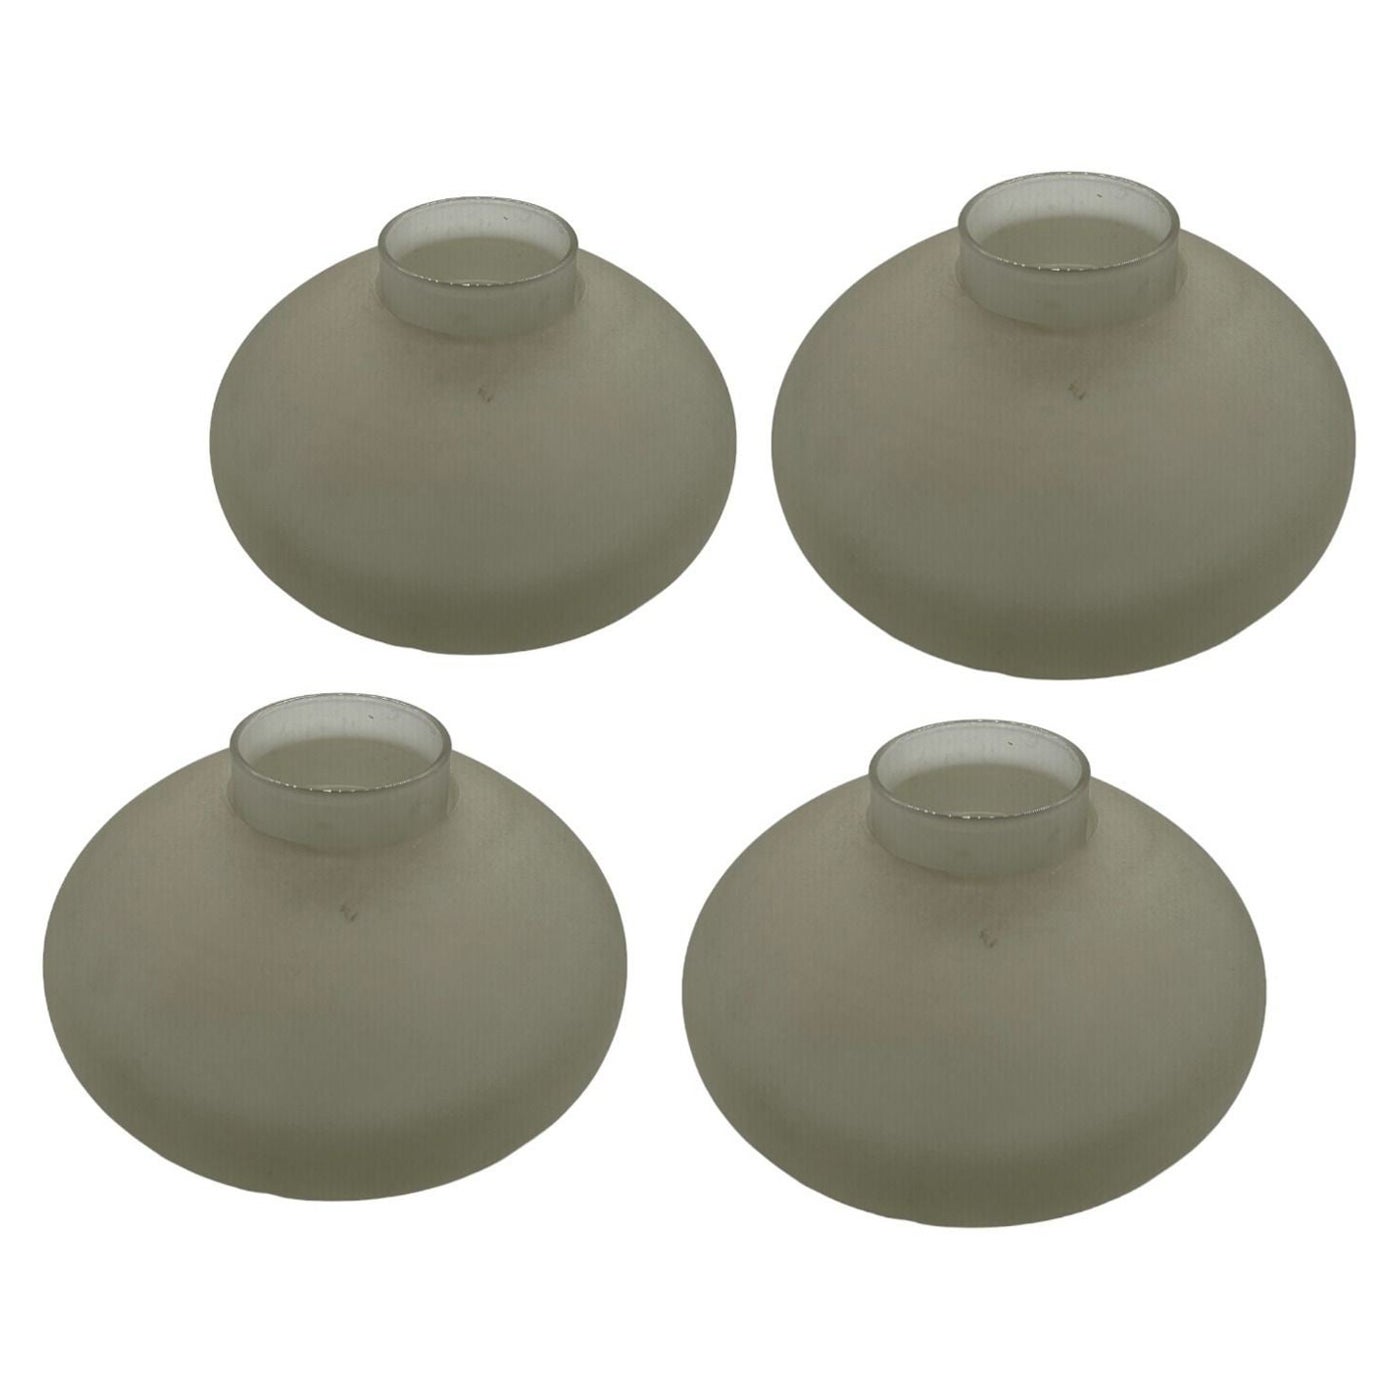 Vintage Candle Holders Round w/removeable inner tubes Set of 4